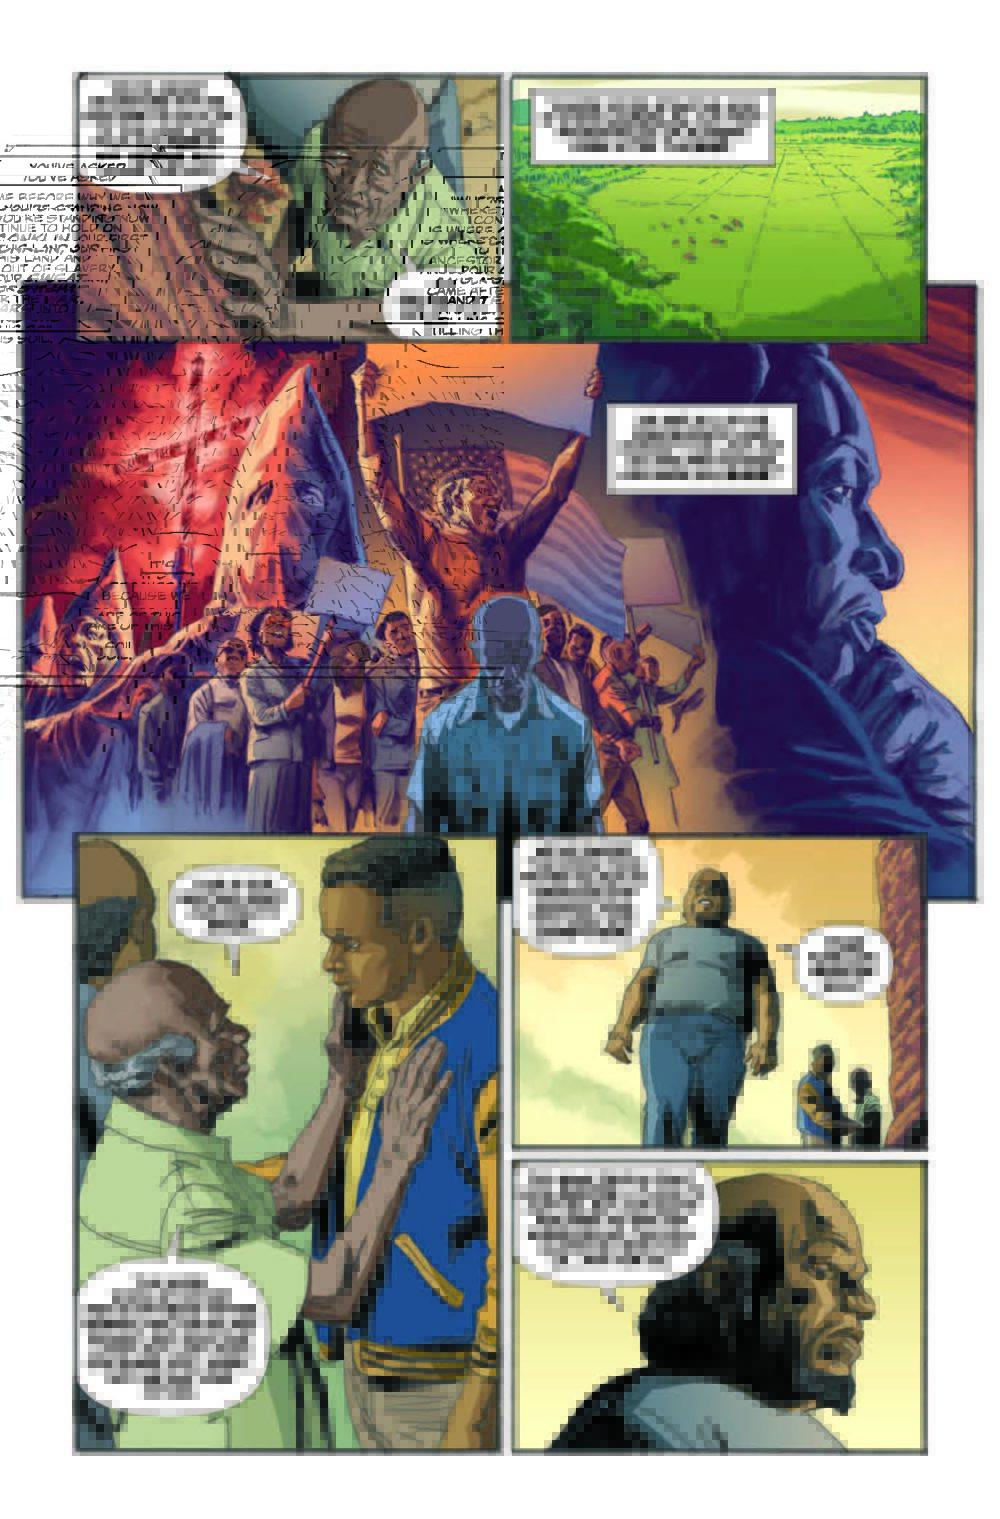 The story of the Holland family farm in Mississippi told in &quot;Represent!,&quot; part of the DC Comics' Heritage series. (DC Comics)